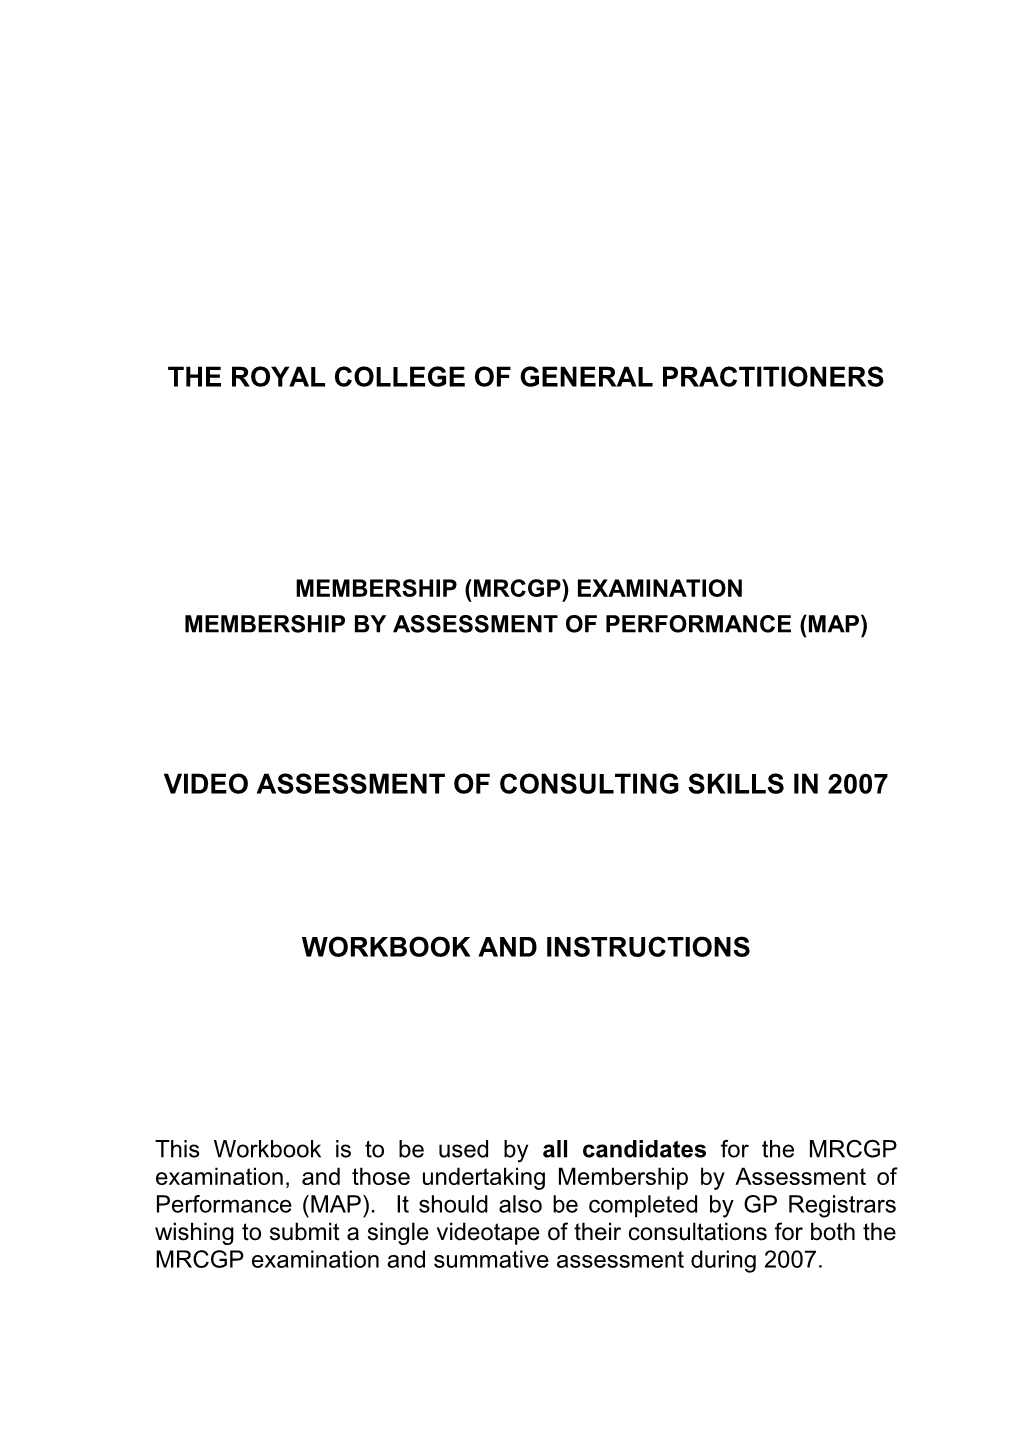 The Royalcollege of General Practitioners